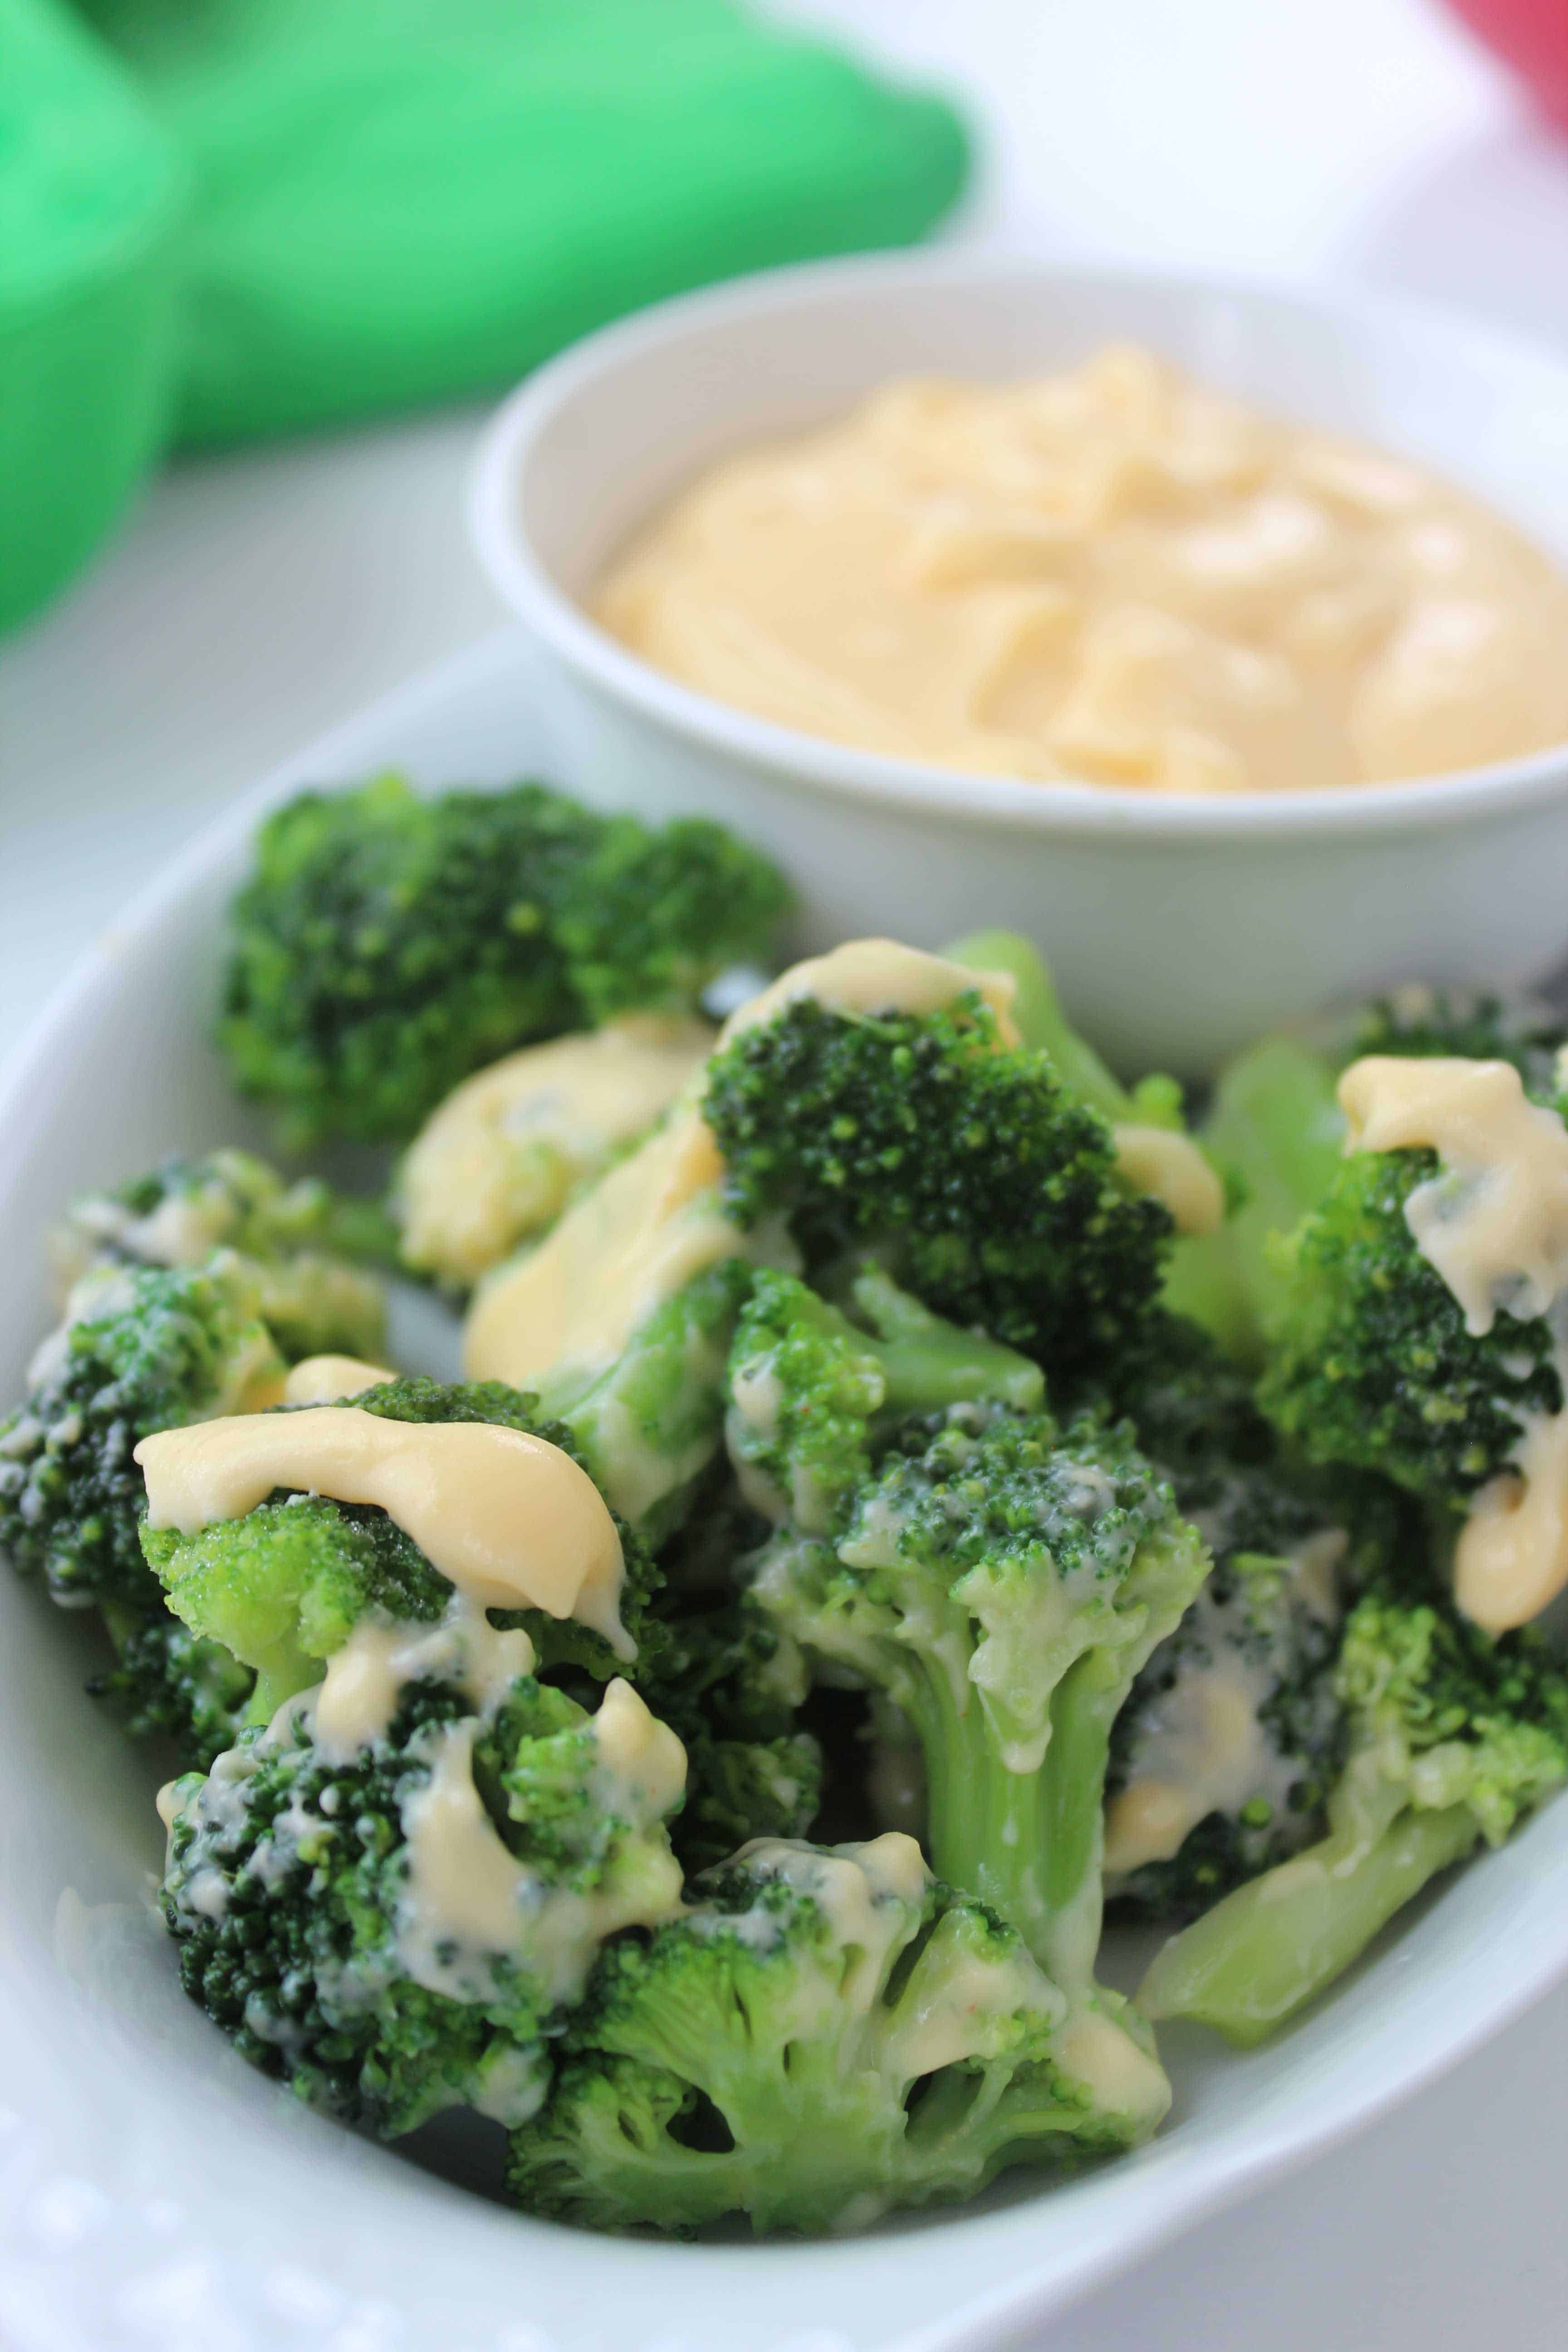 This cheddar cheese sauce recipe is easy to make and tastes great on broccoli, cauliflower, potatoes, chicken any type of vegetable bake, or makes a simple cheese sauce for pasta. Use this whenever a recipe calls for a creamy cheese sauce.